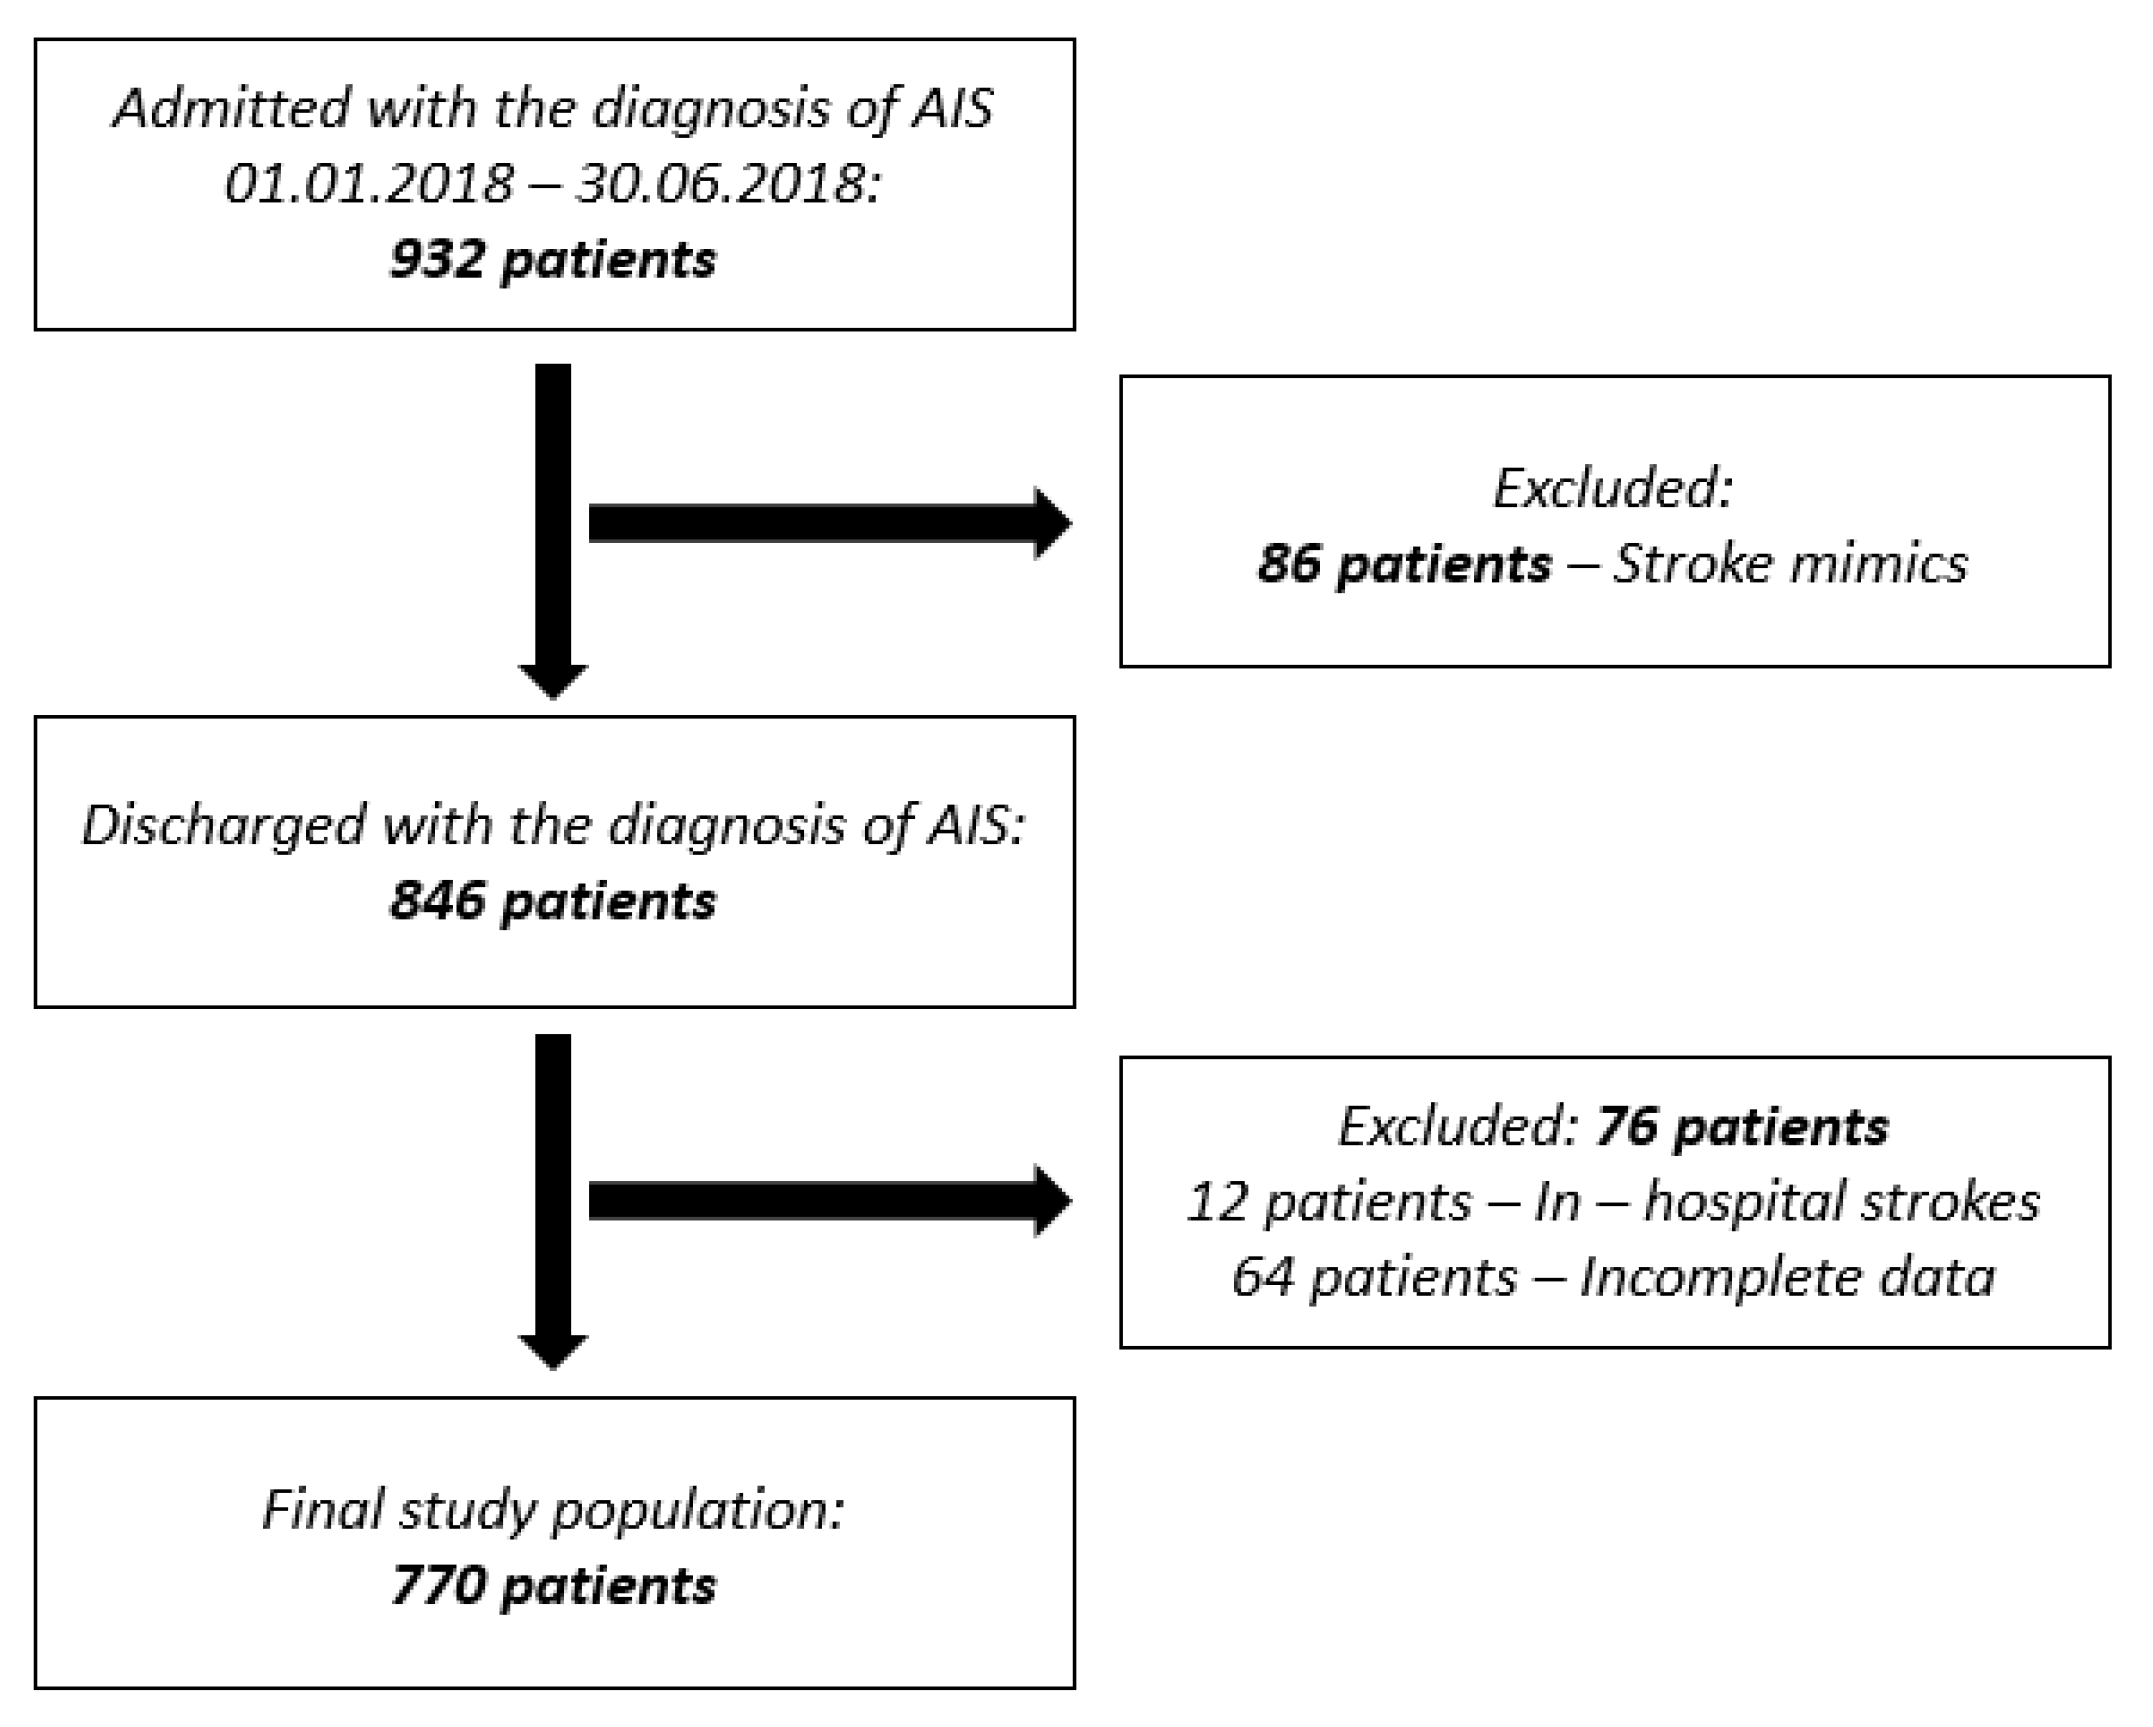 Medicina | Free Full-Text | Pre-Hospital Delay in Acute Ischemic Stroke  Care: Current Findings and Future Perspectives in a Tertiary Stroke Center  from Romania&mdash;A Cross-Sectional Study